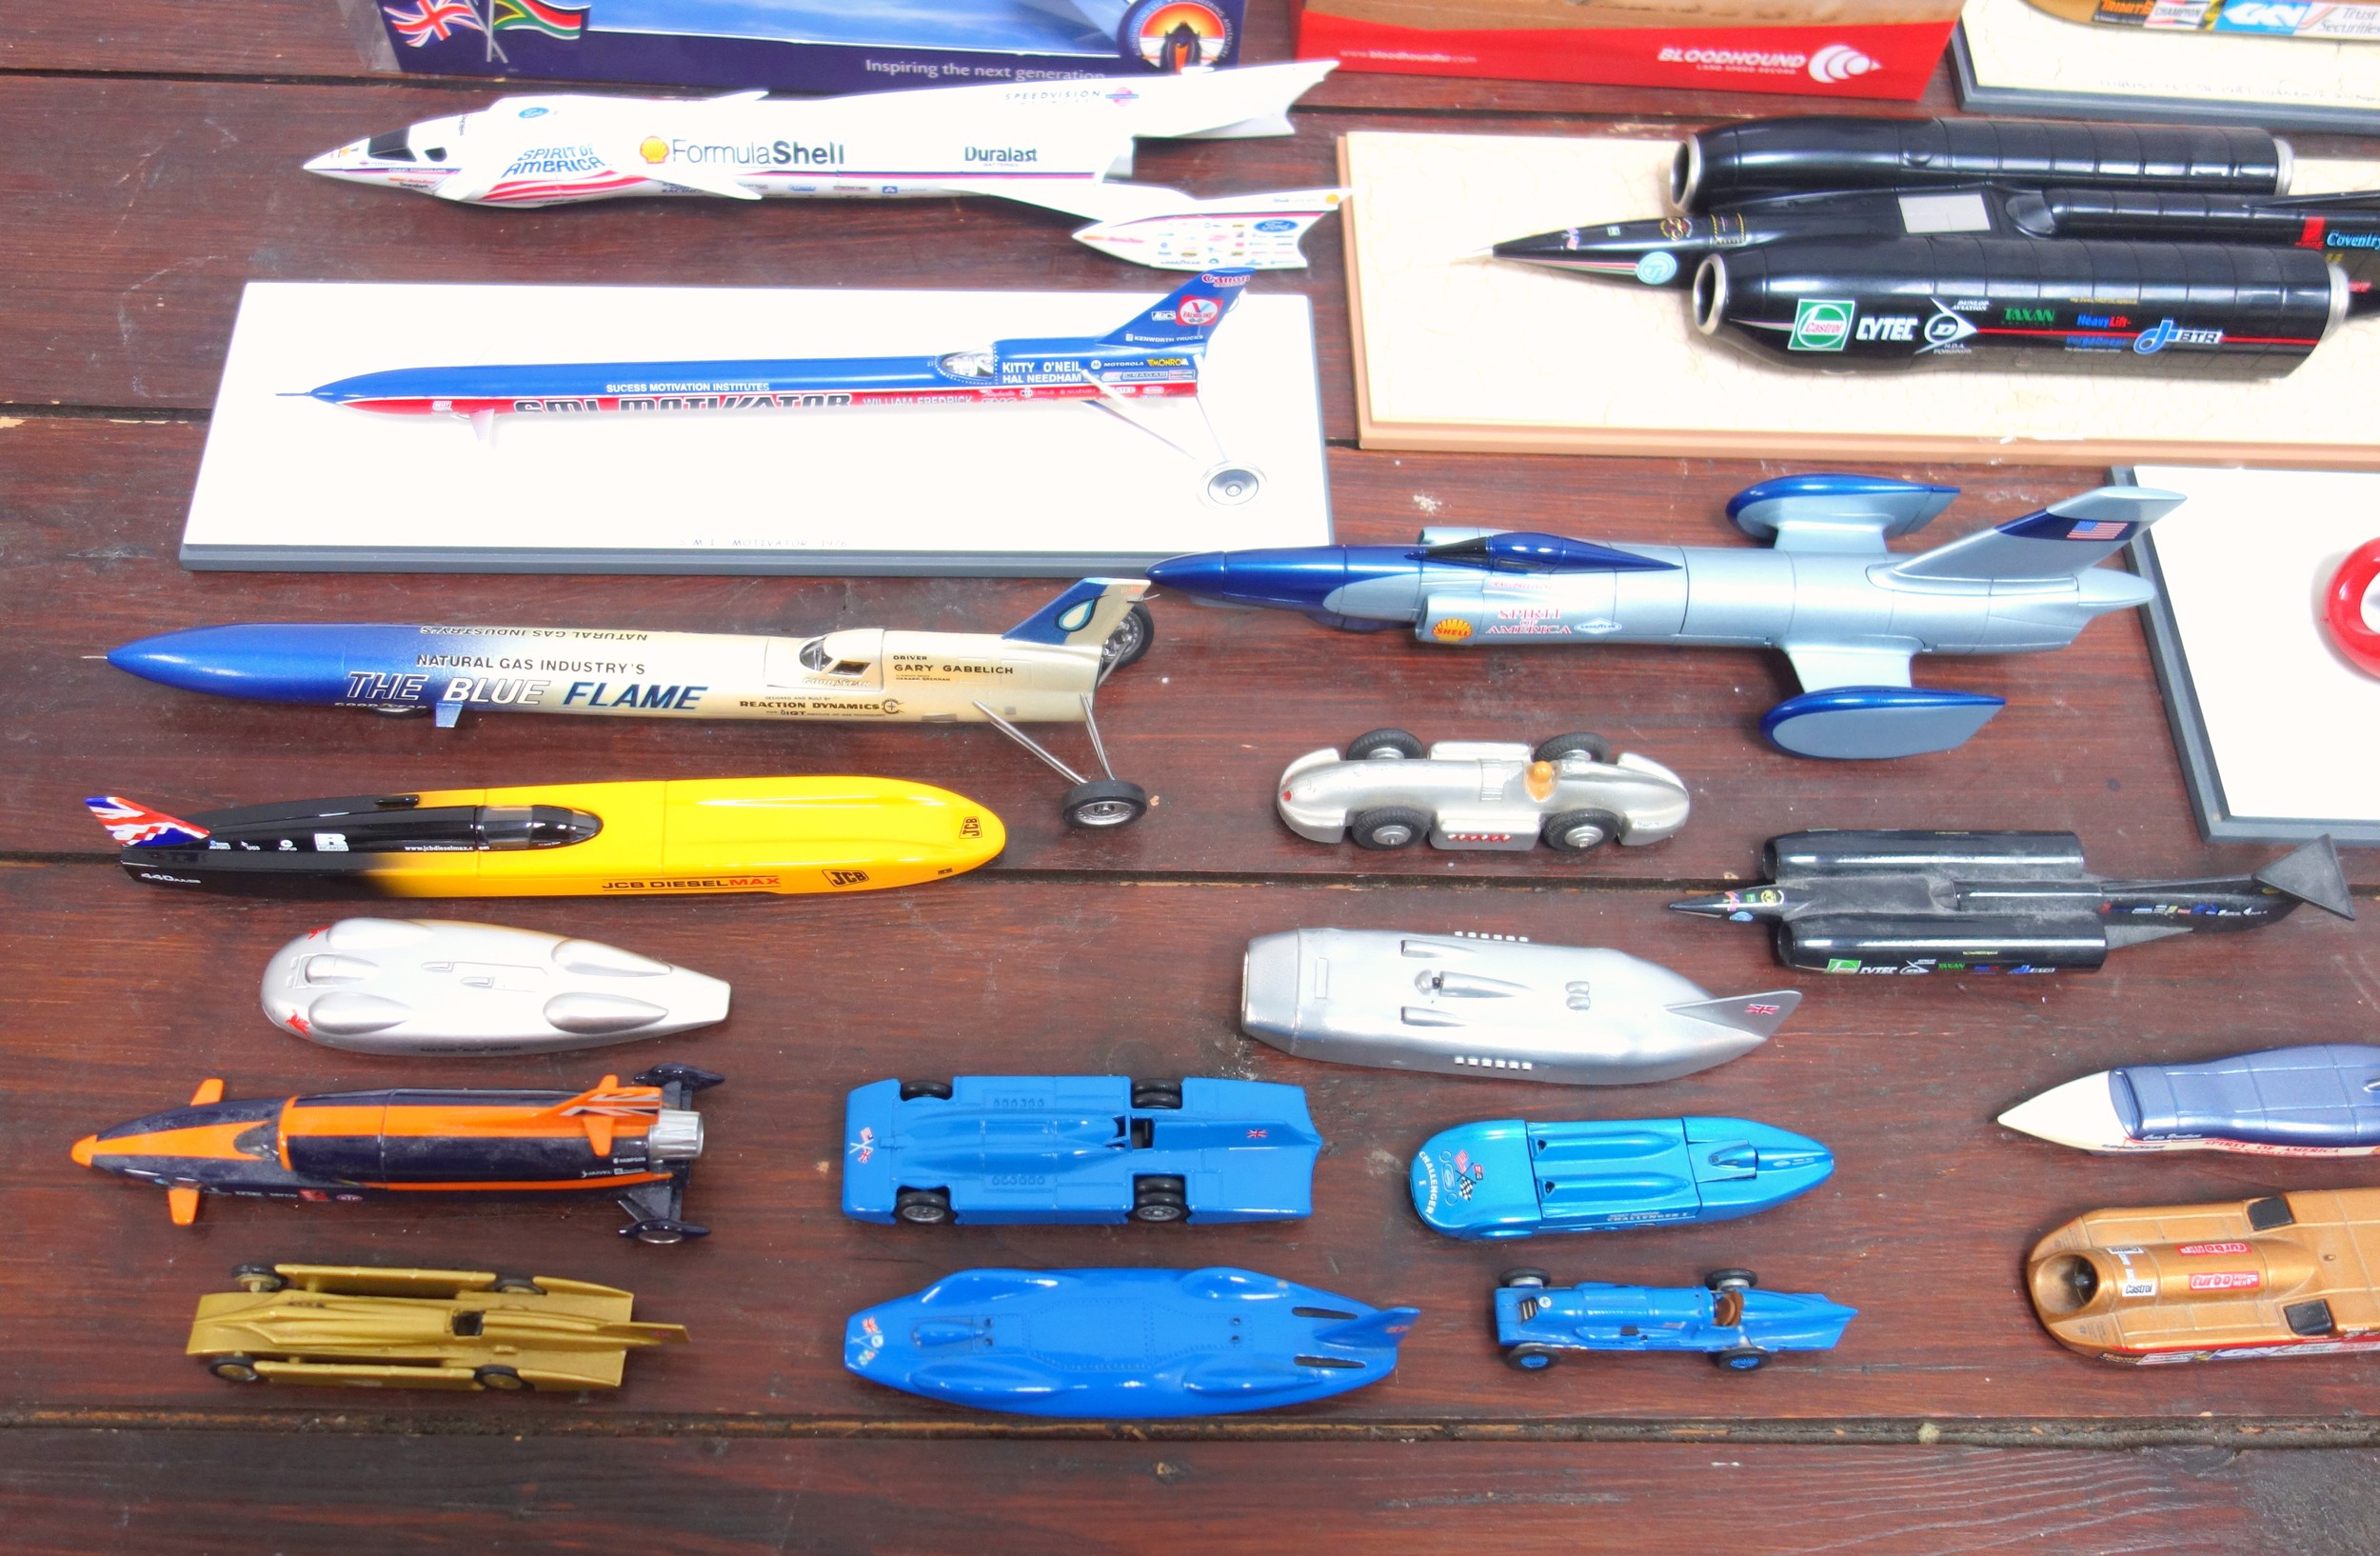 Collection of 25 models of land speed record cars, including Donald Campbell's Bluebirds, Bloodhound - Image 3 of 6